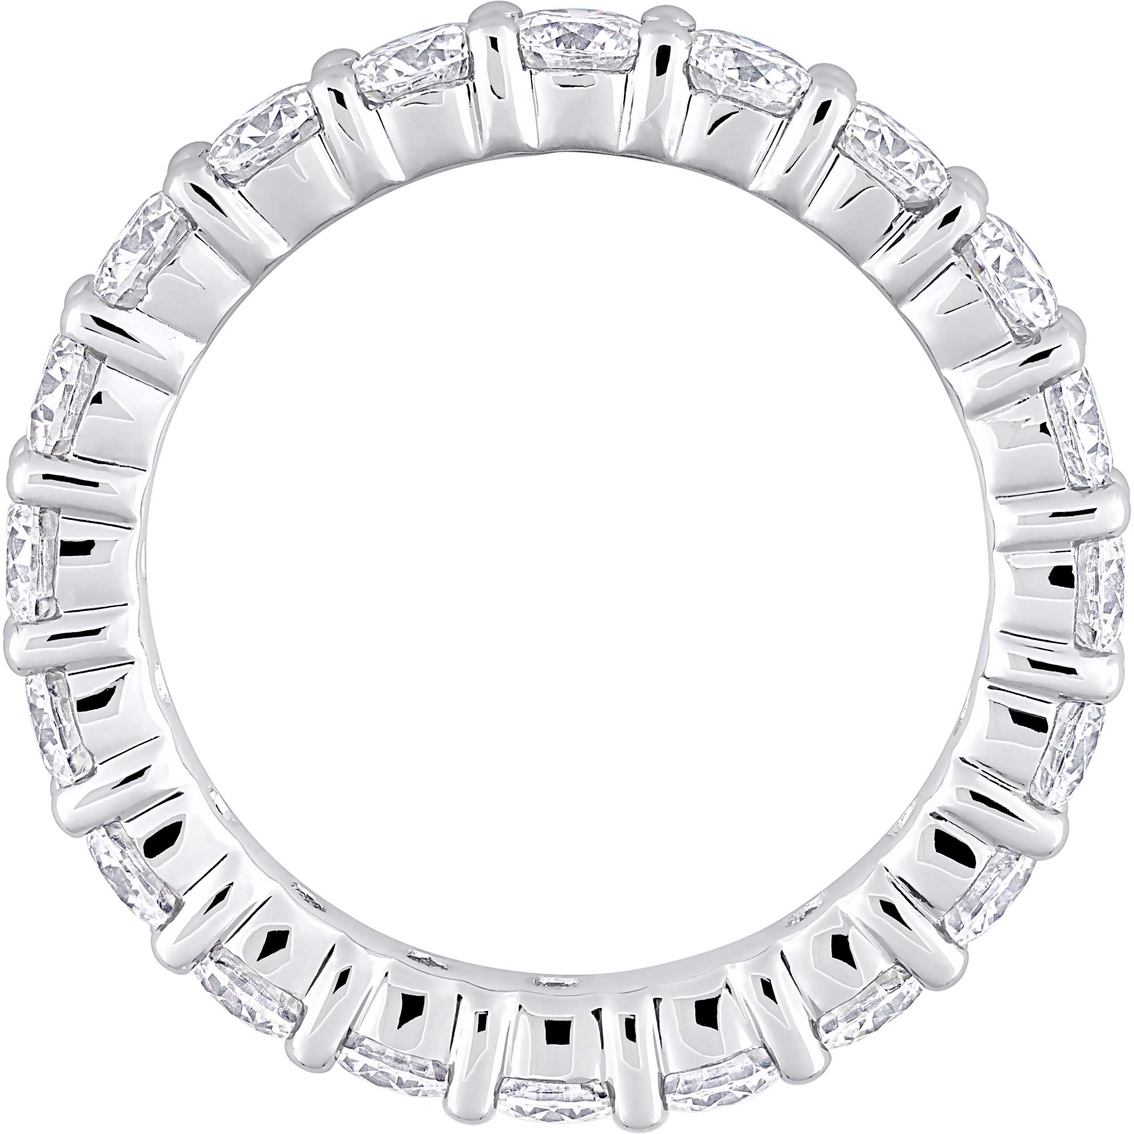 Sofia B. Sterling Silver 2 1/2 CT DEW Moissanite Eternity Ring - Image 3 of 5